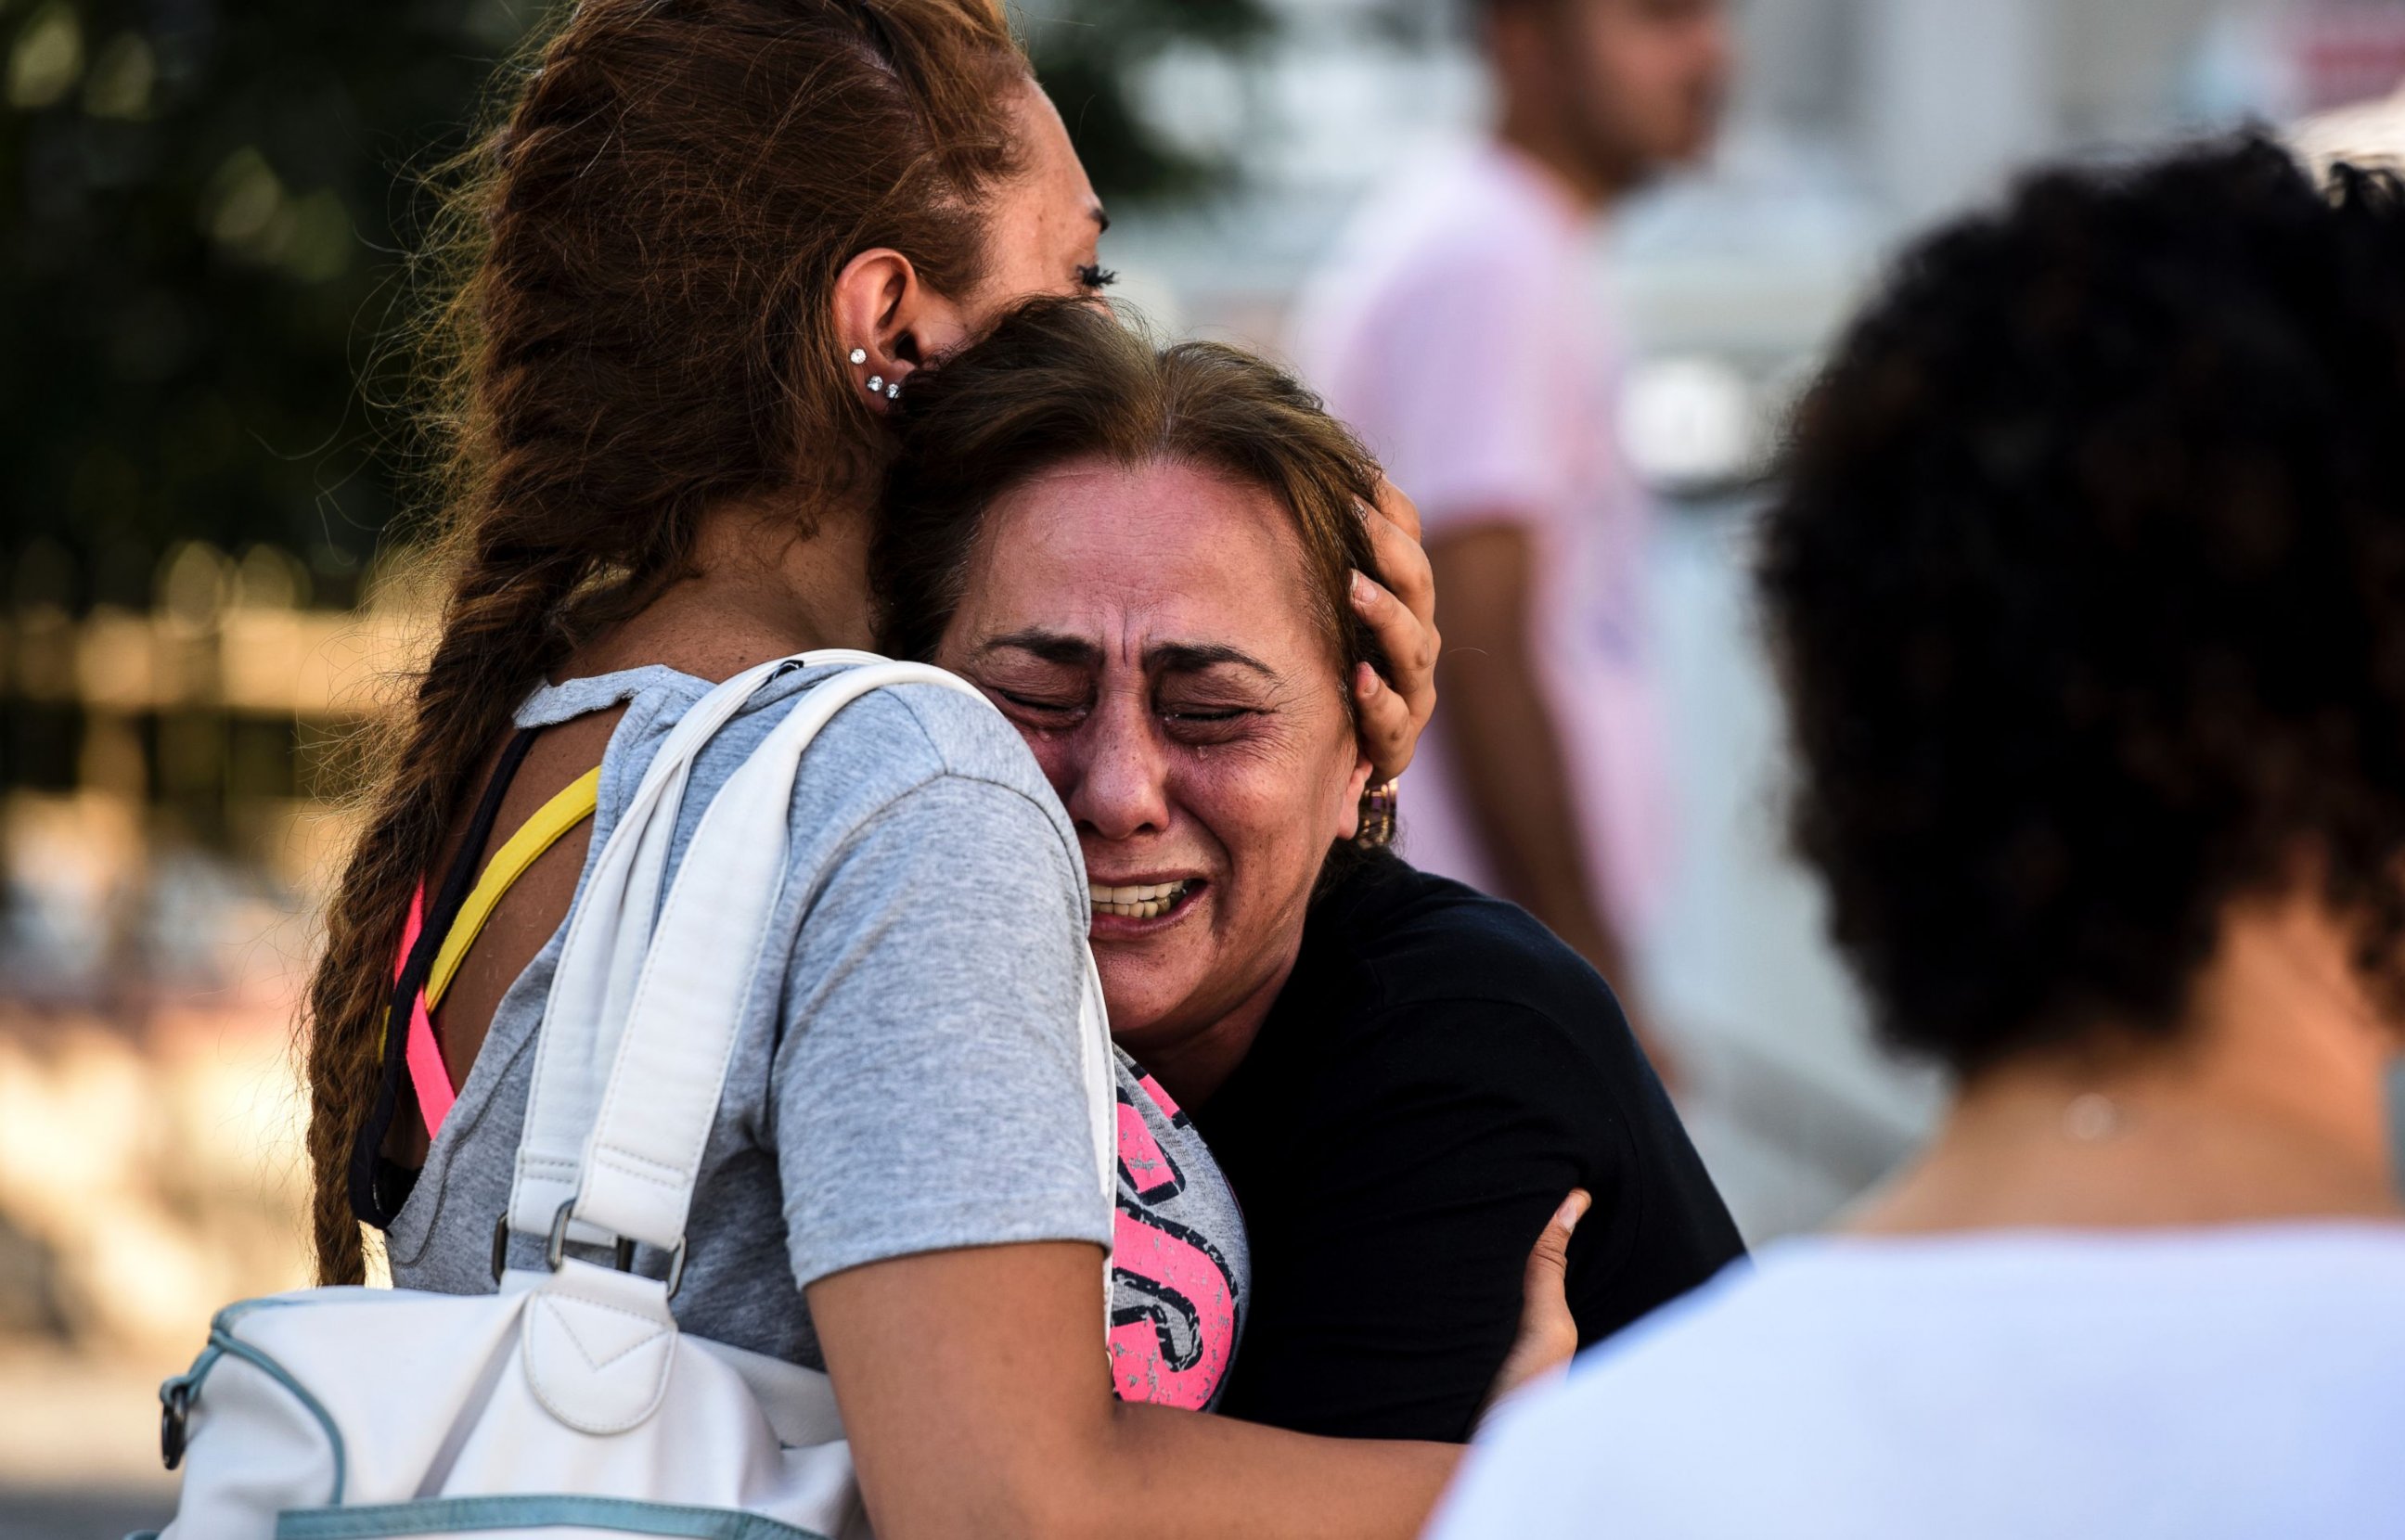 PHOTO: A mother of victims reacts outside a forensic medicine building close to Istanbul's airport, June 29, 2016.